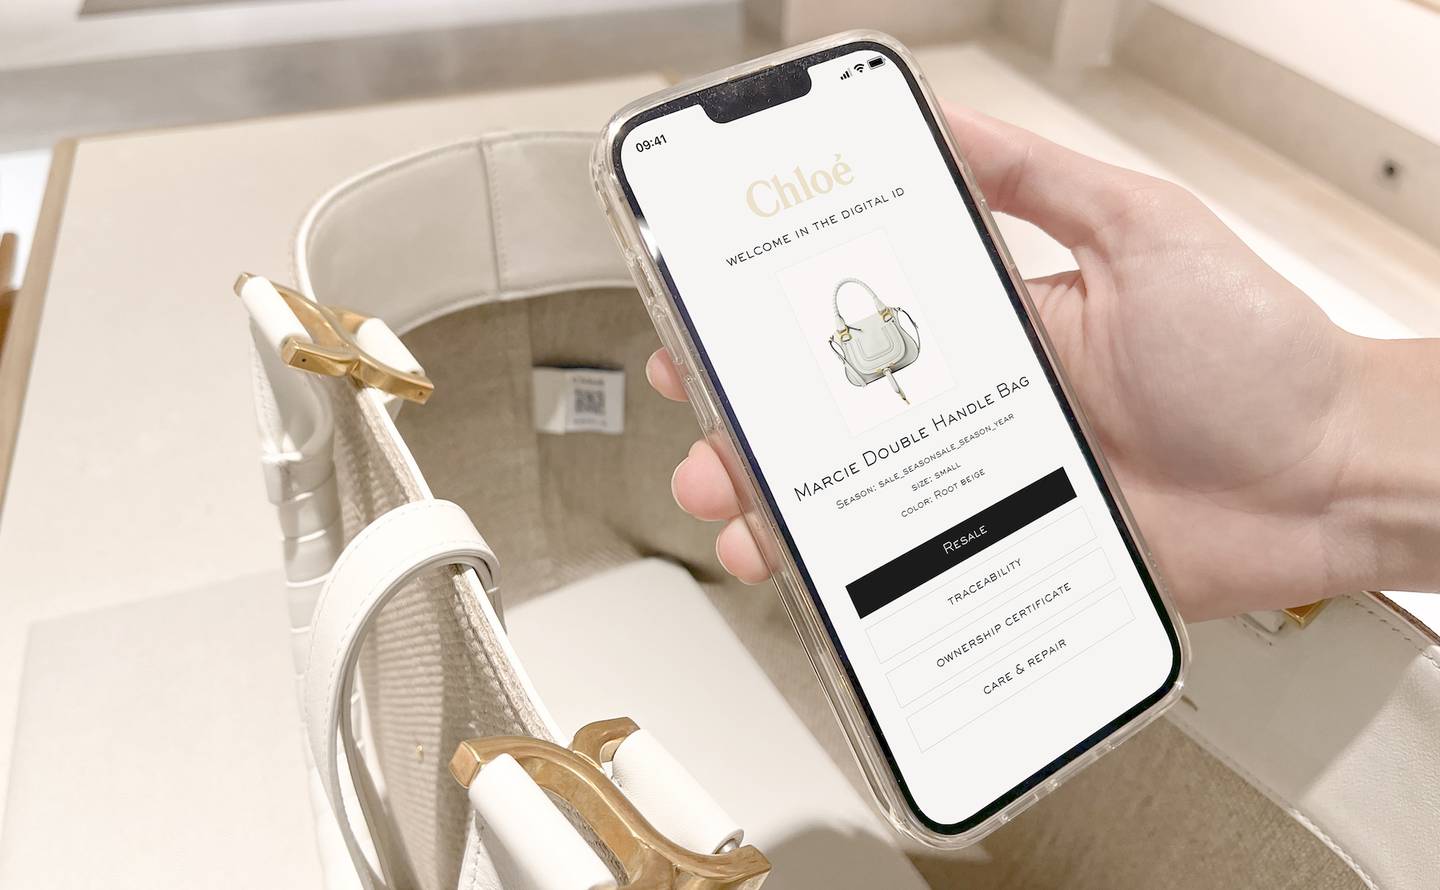 An image of a phone hovering over a white handbag showing an example of one of digital product IDs Chloé is road testing.